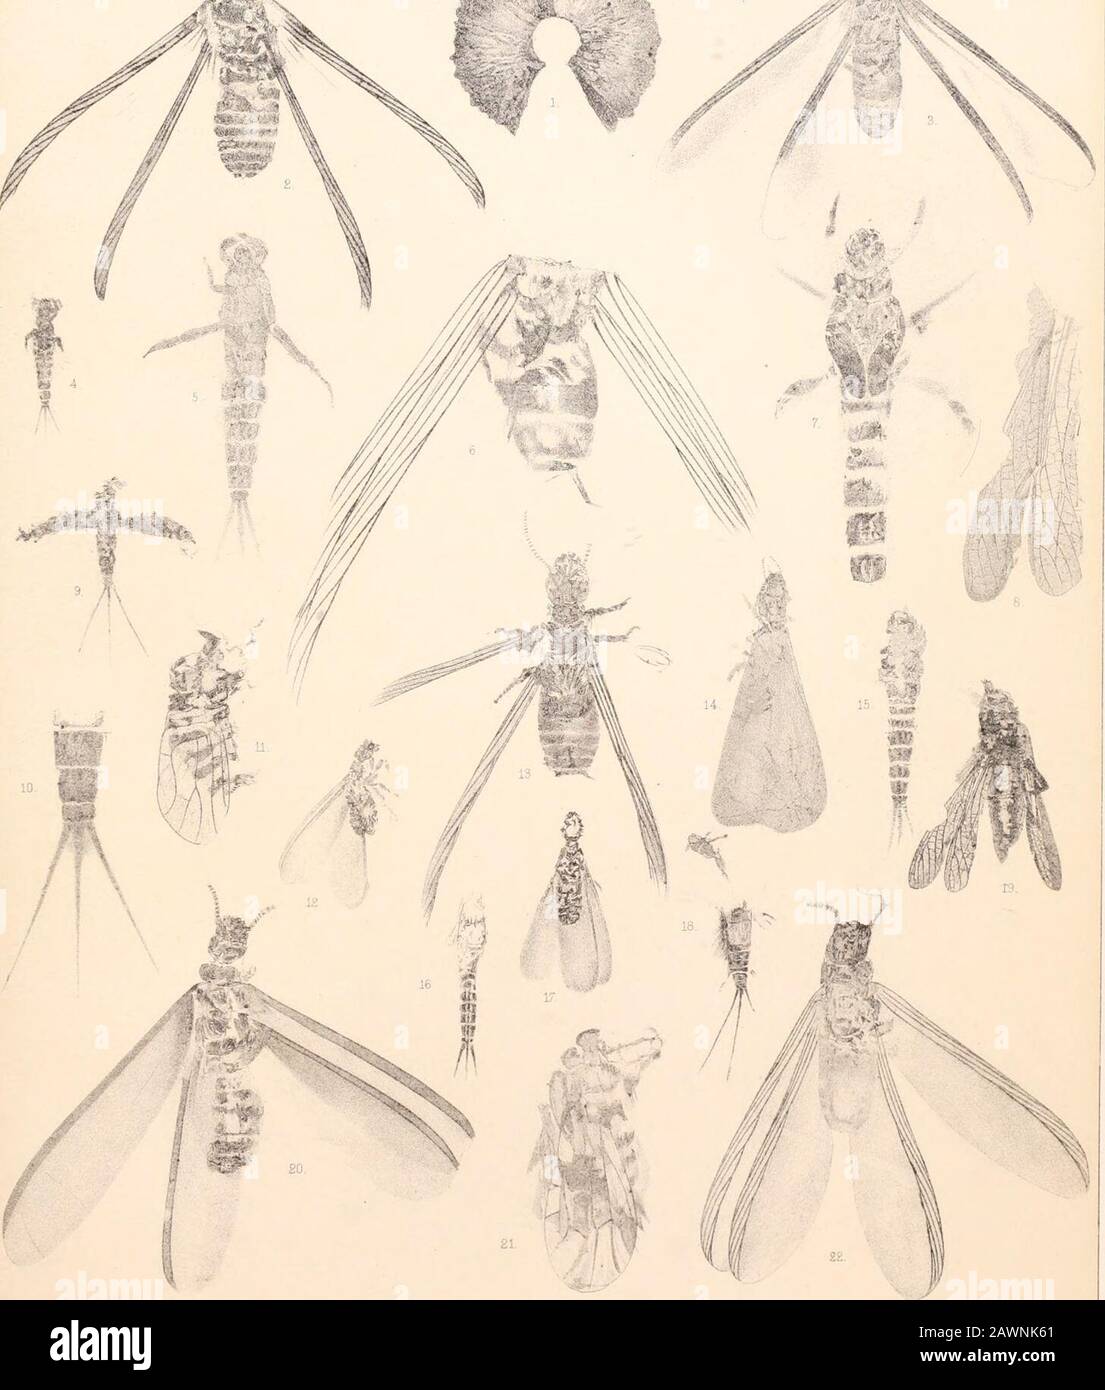 Report of the United States Geological Survey of the territories . ) Lepisma platymrr.i. Some of the abdominal joints are nui, iudicated. 19. (4643) (I) Taphacris reliquata. 20. (B049) (f) Eutermes fossarum. 21. (310) (^,5-) Necropsylla rigida. 22. (11190) (f) Parotermes fodiua;. U S. GEOLOGICAL SURVEY OF THE TERRITORIES-Iertiary Insects op North America Pi. Yc 0.. T Sinclair !t Son,l,ith Philaa. The FiiORiysANT Basin Myjuaiiida . Nkukoitkua PLATE XIII EXPLANATION OF PLATE XIII. All the drawings were made by J. Heury Blake. 1. (8347) (f) .Slschna (.Eschua) solida. 2. (8995) (f) Limnopsyche dis Stock Photo